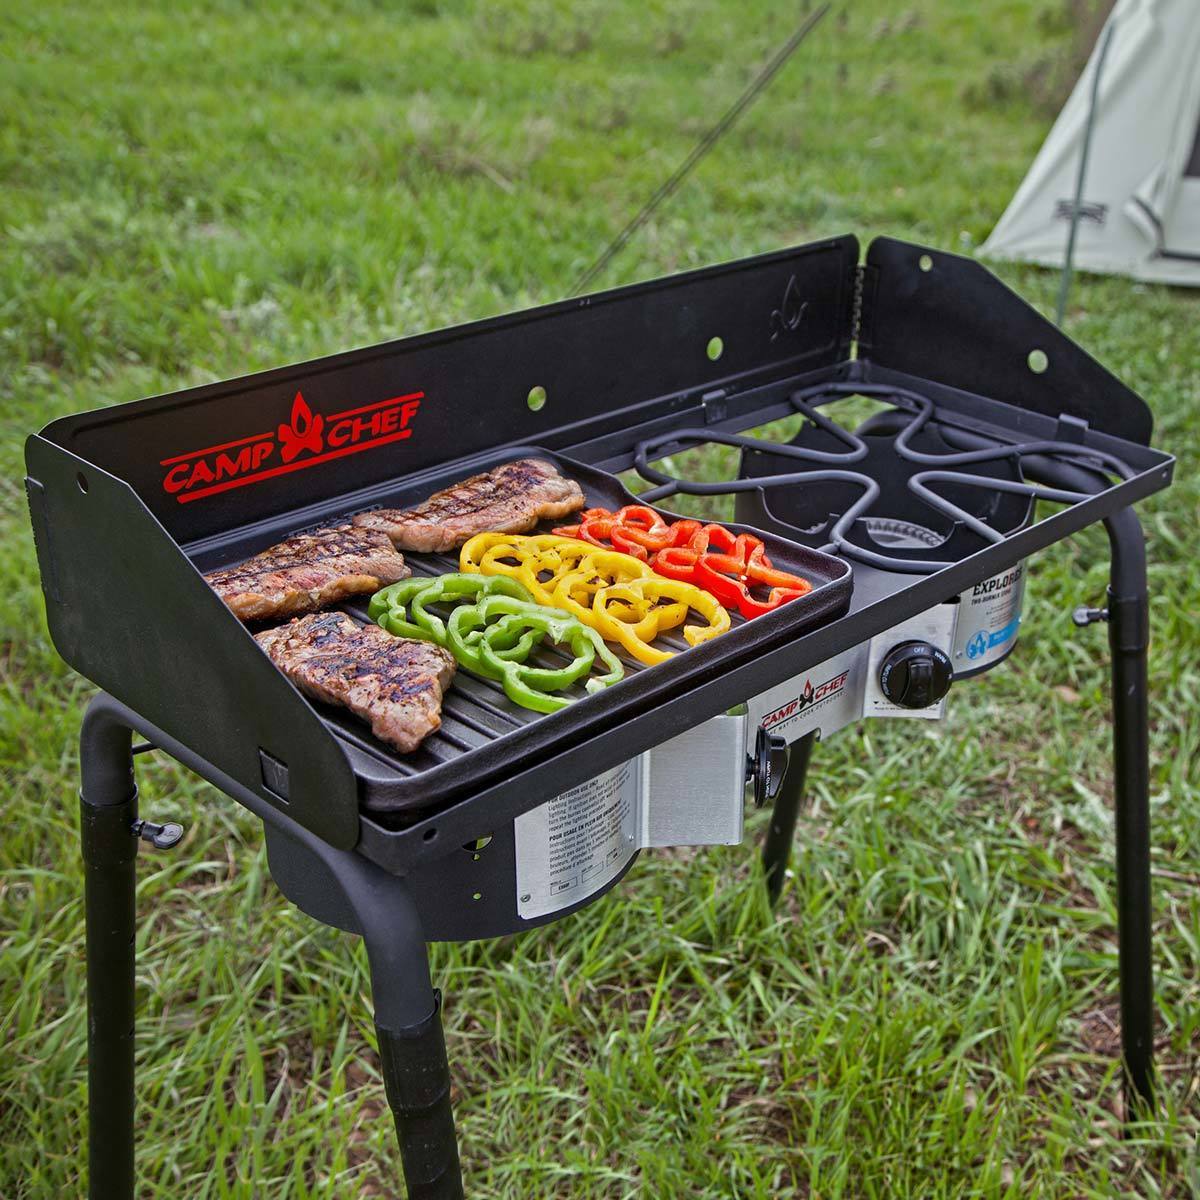  Camp Chef 3 Burner Stove With Griddle Costco Info